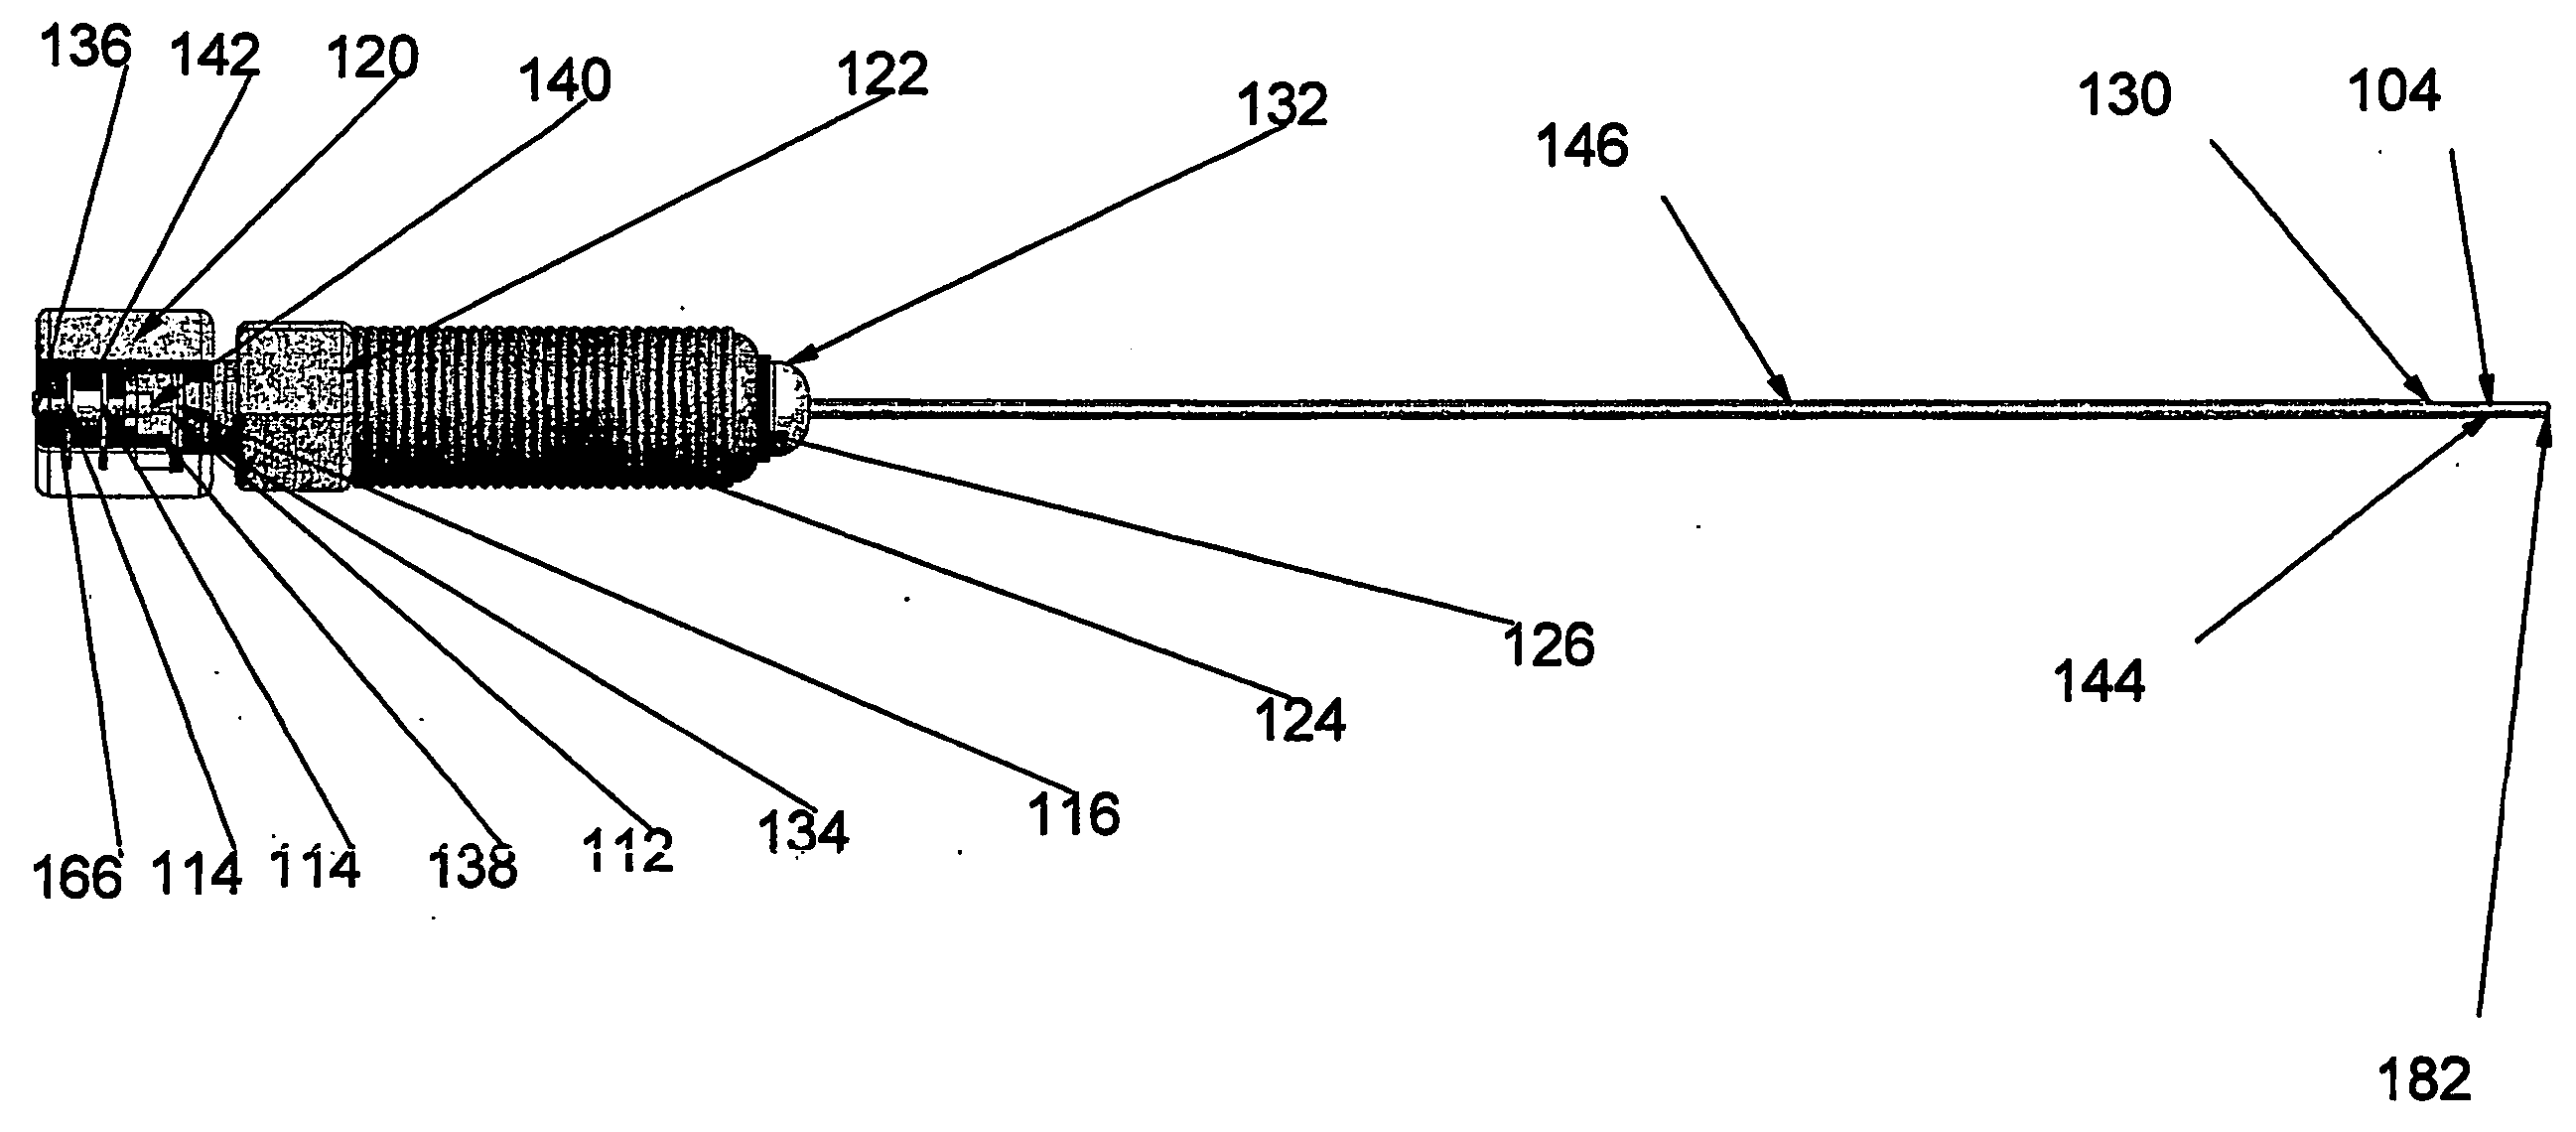 Adjustable Device Delivery System